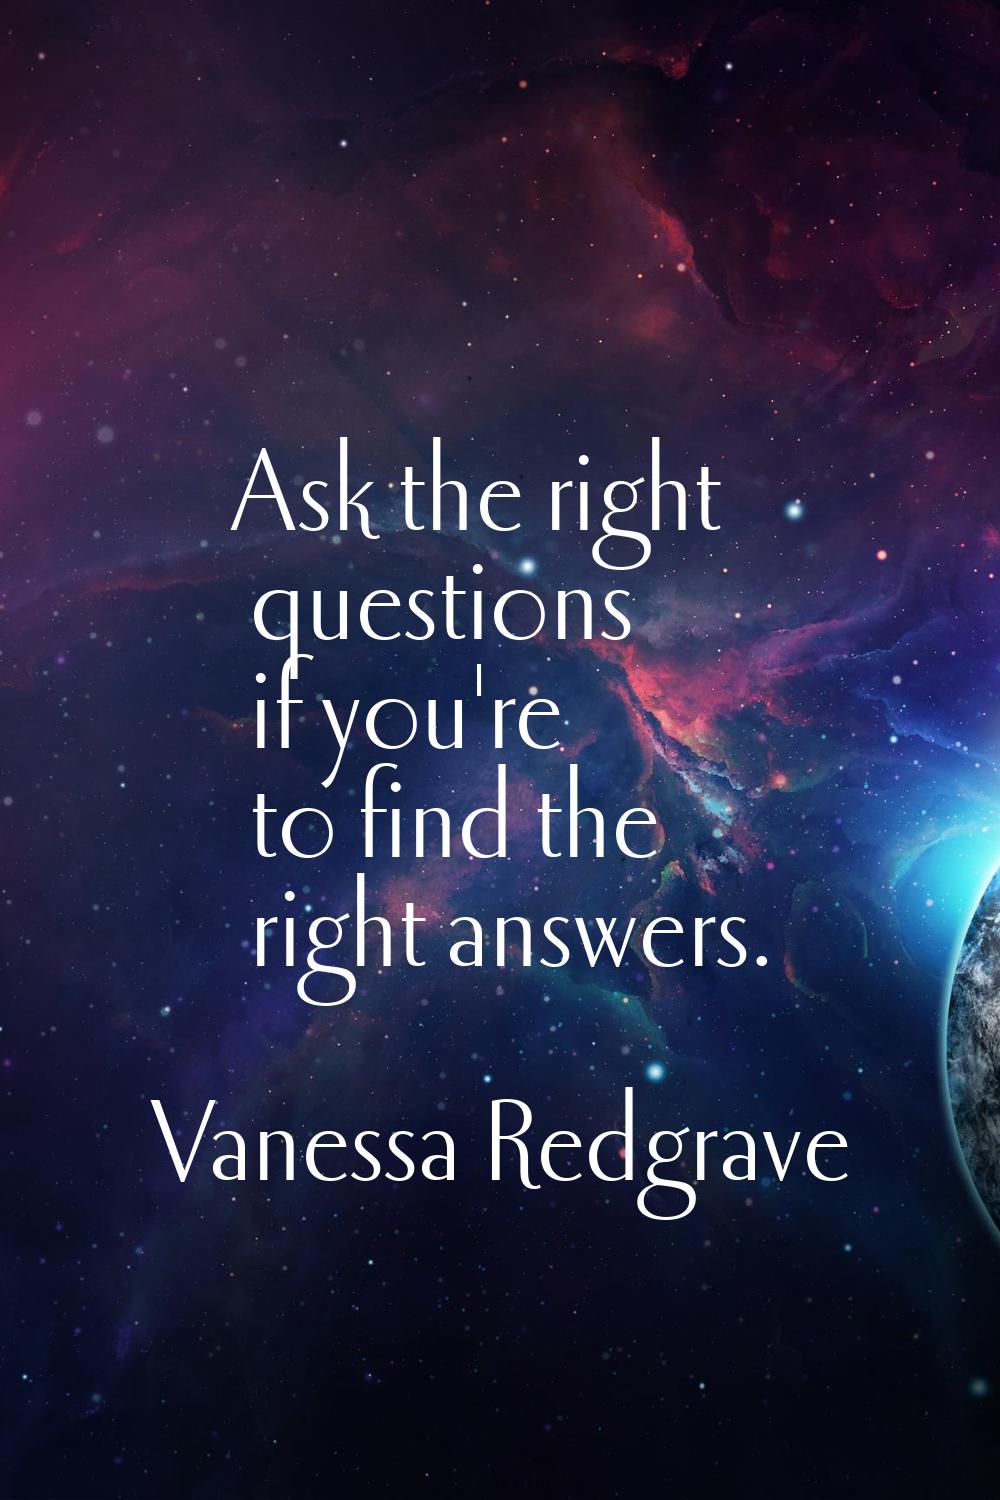 Ask the right questions if you're to find the right answers.